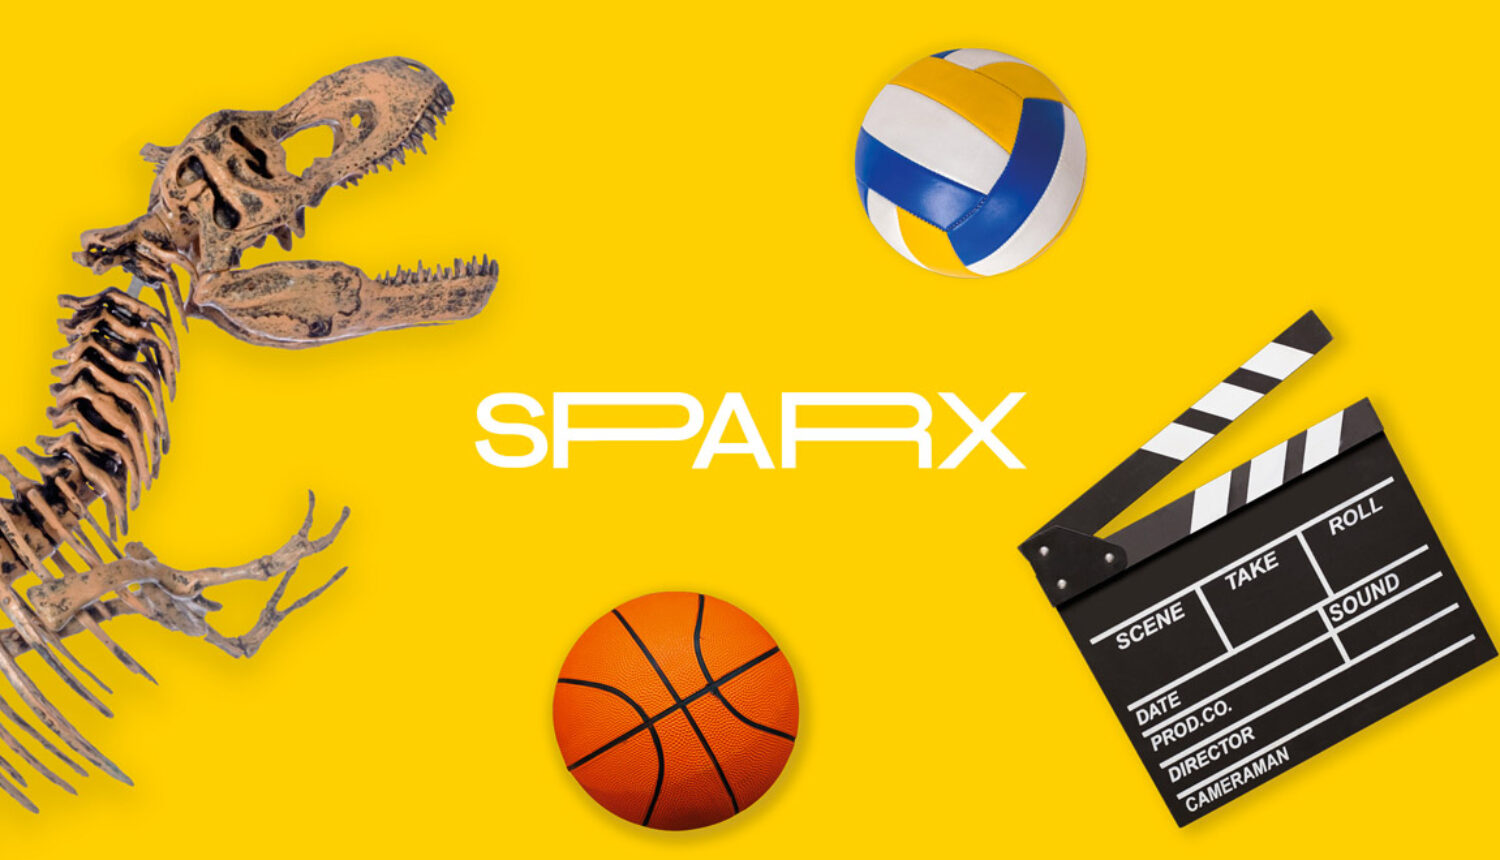 New after-school activities, powered by Sparx